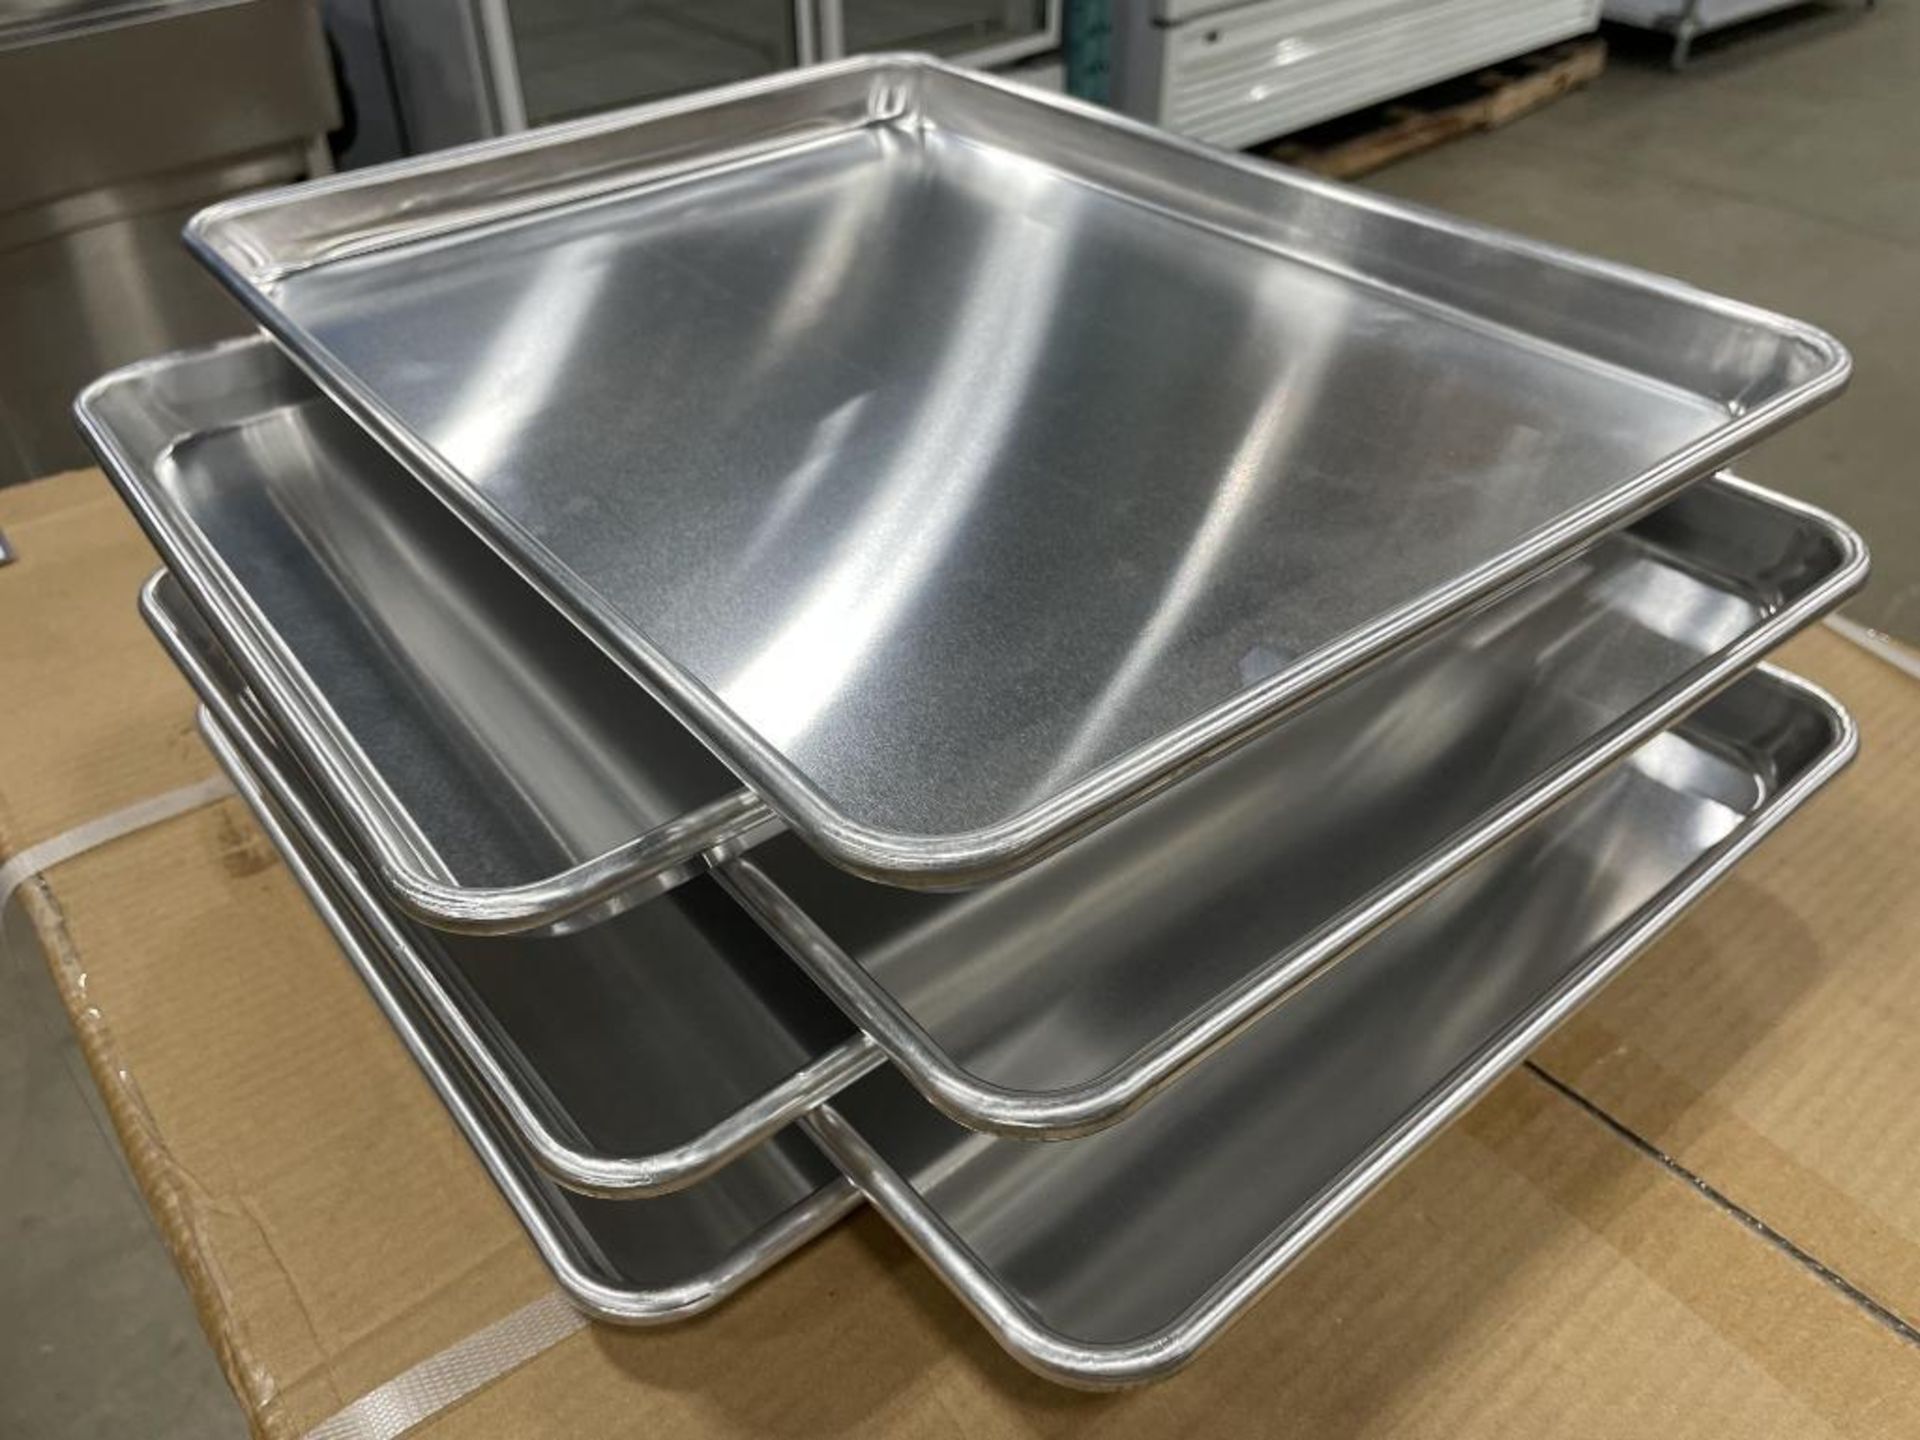 LOT OF (6) HALF SIZE BUN PANS, UPDATE ABNP-50 - NEW - Image 2 of 6